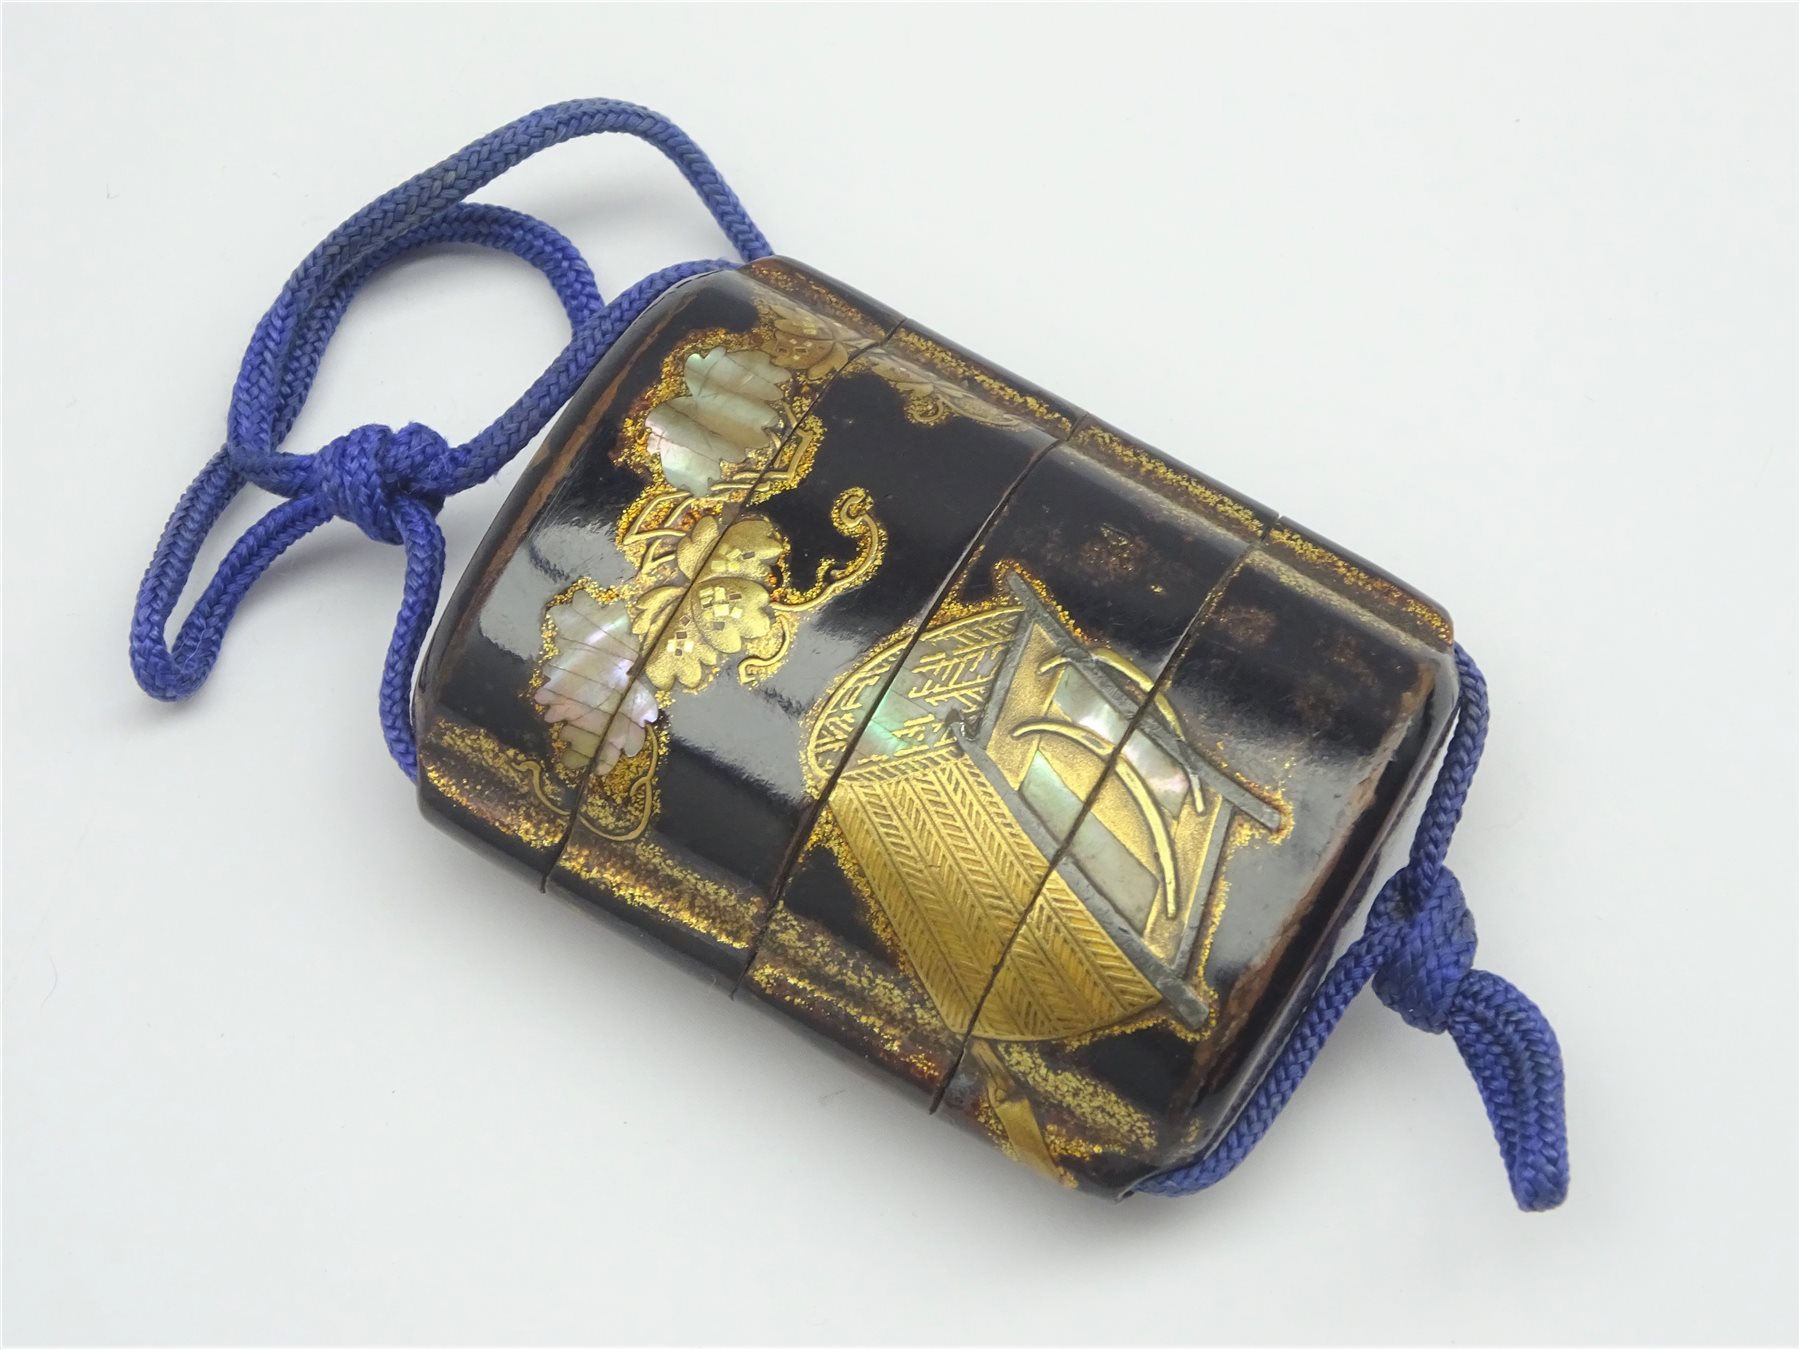 Another Japanese Three Case Lacquer Inro Edo Period 18th Century Decorated In Gold Silver